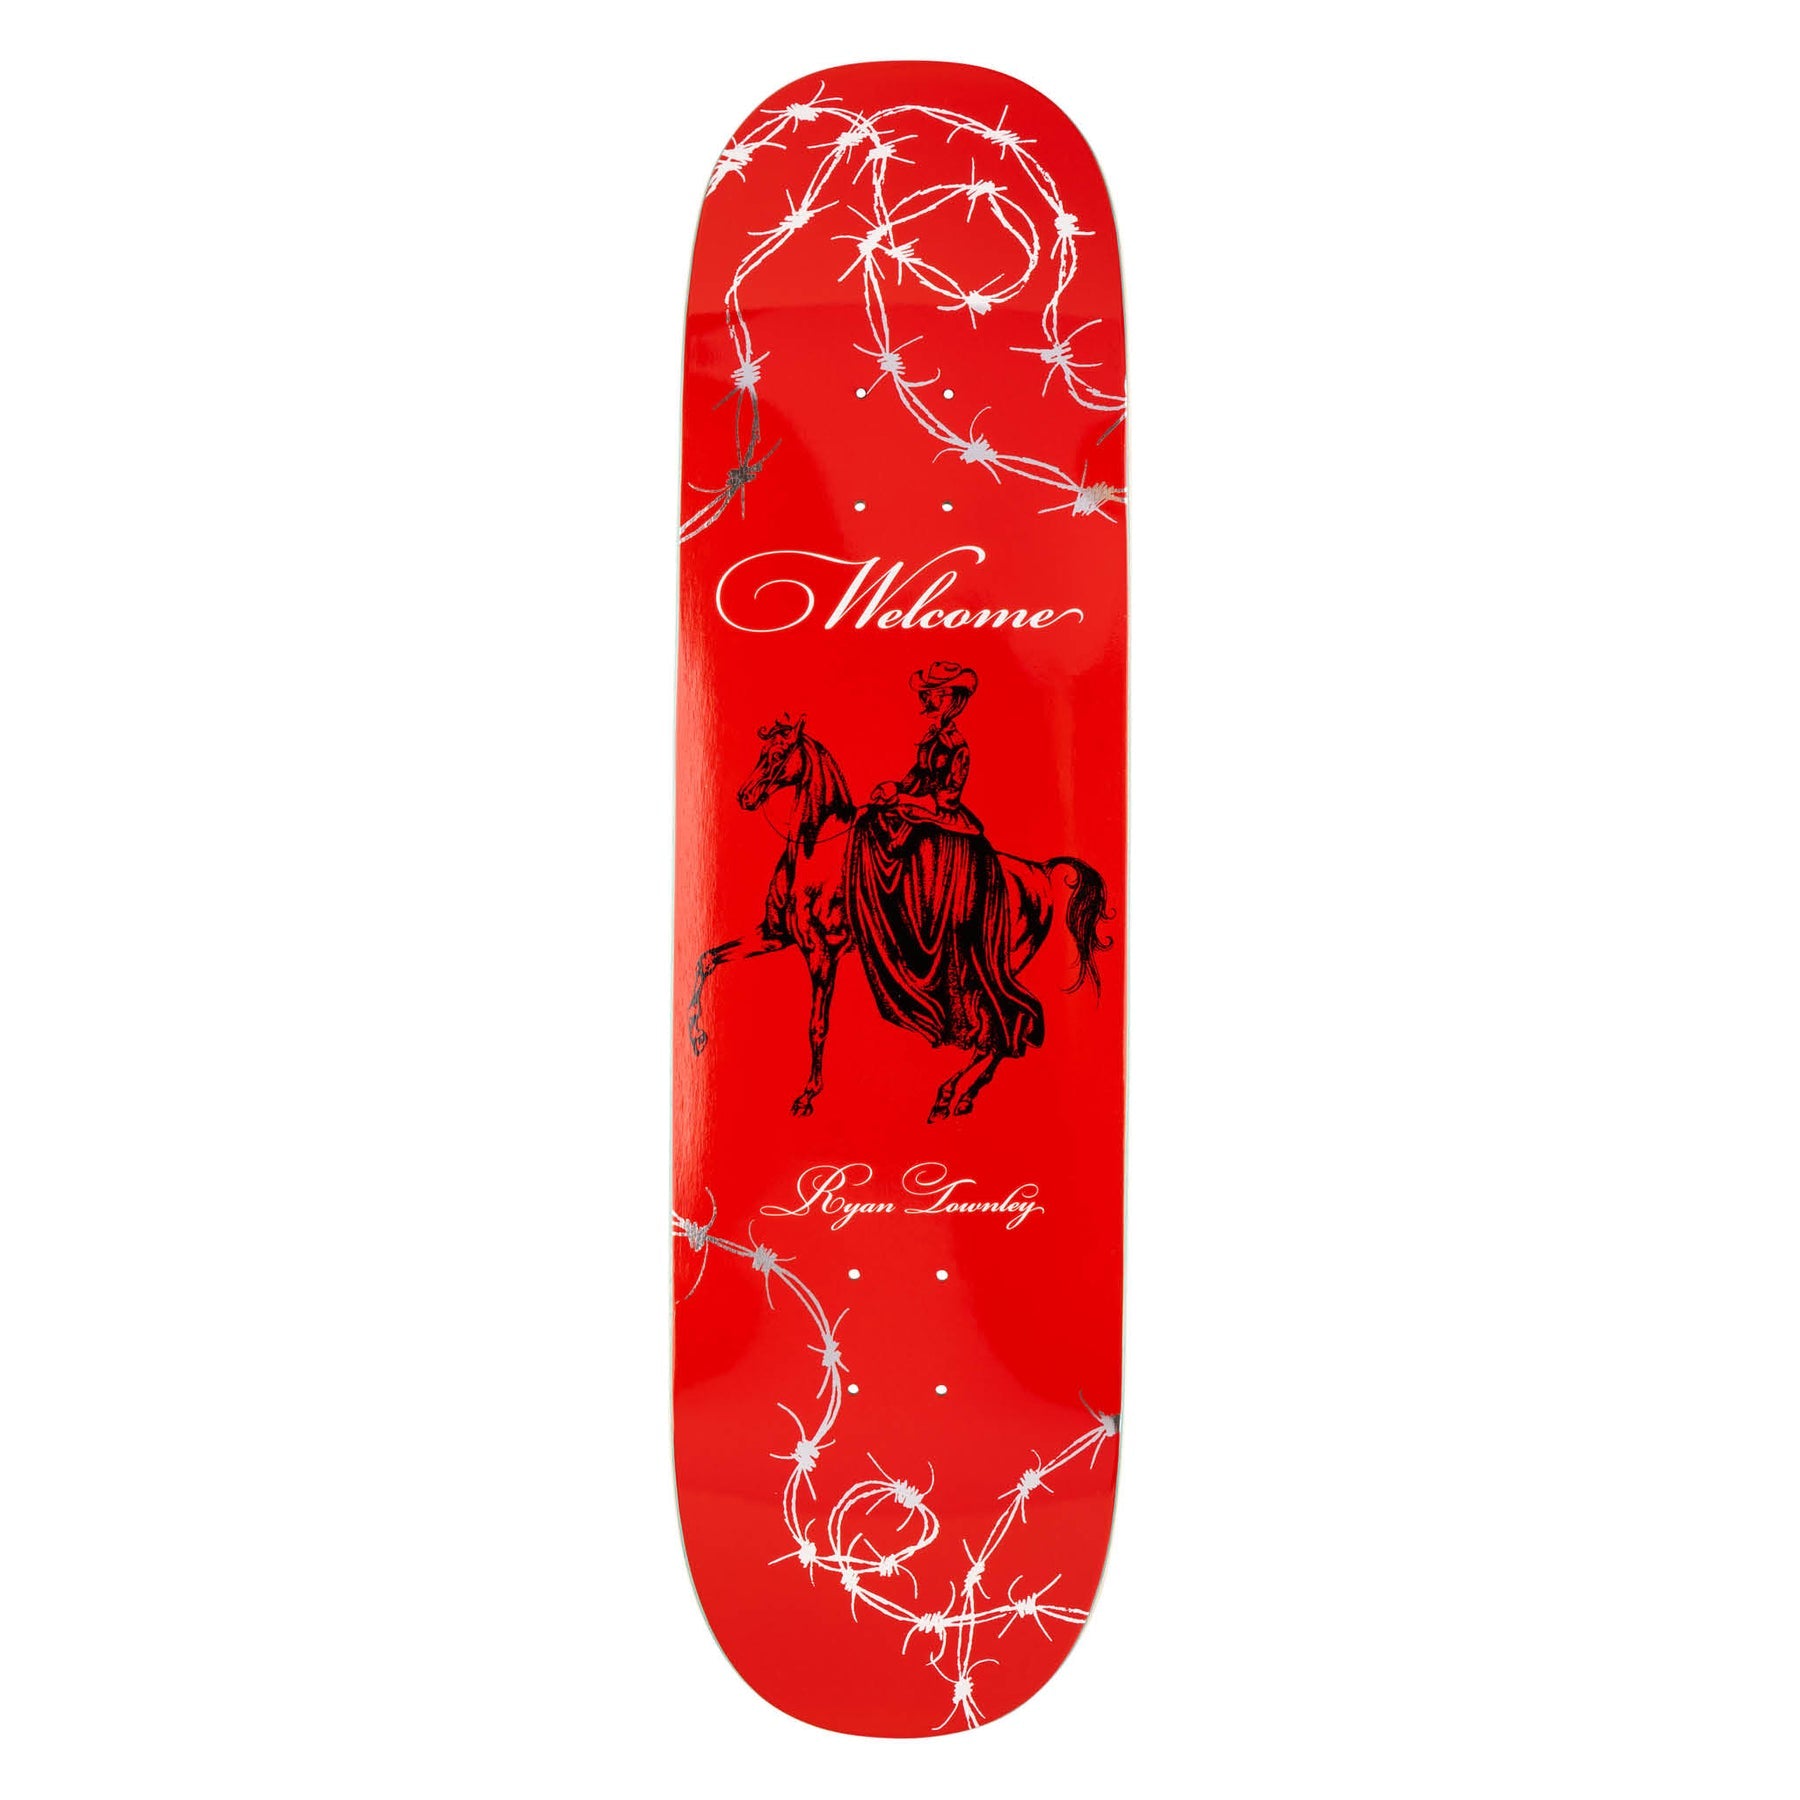 WELCOME DECK COWGIRL RYAN TOWNLEY RES/SILVER (8.5") 